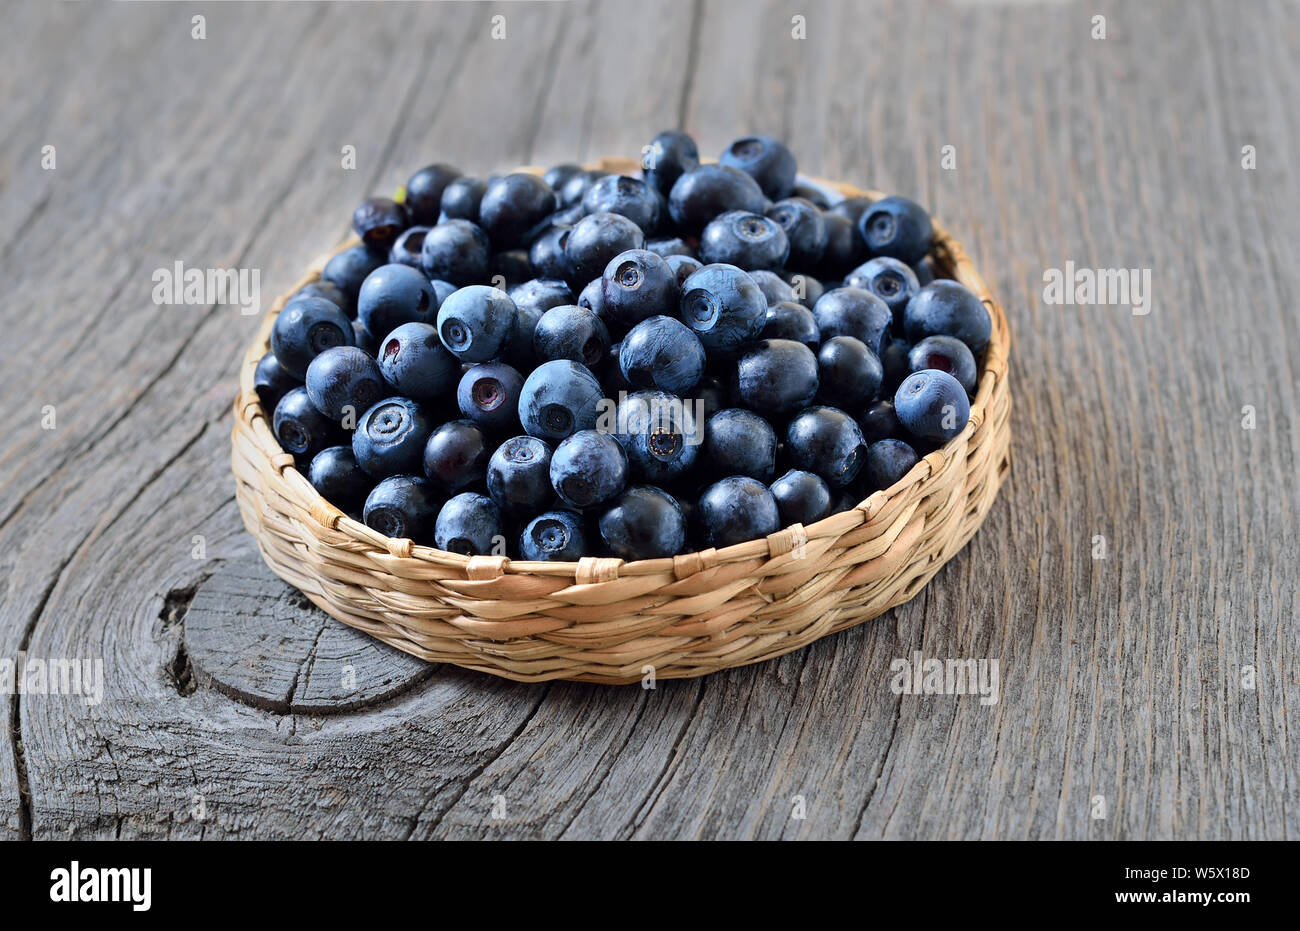 Fresh ripe blueberries on wooden table, close up Stock Photo